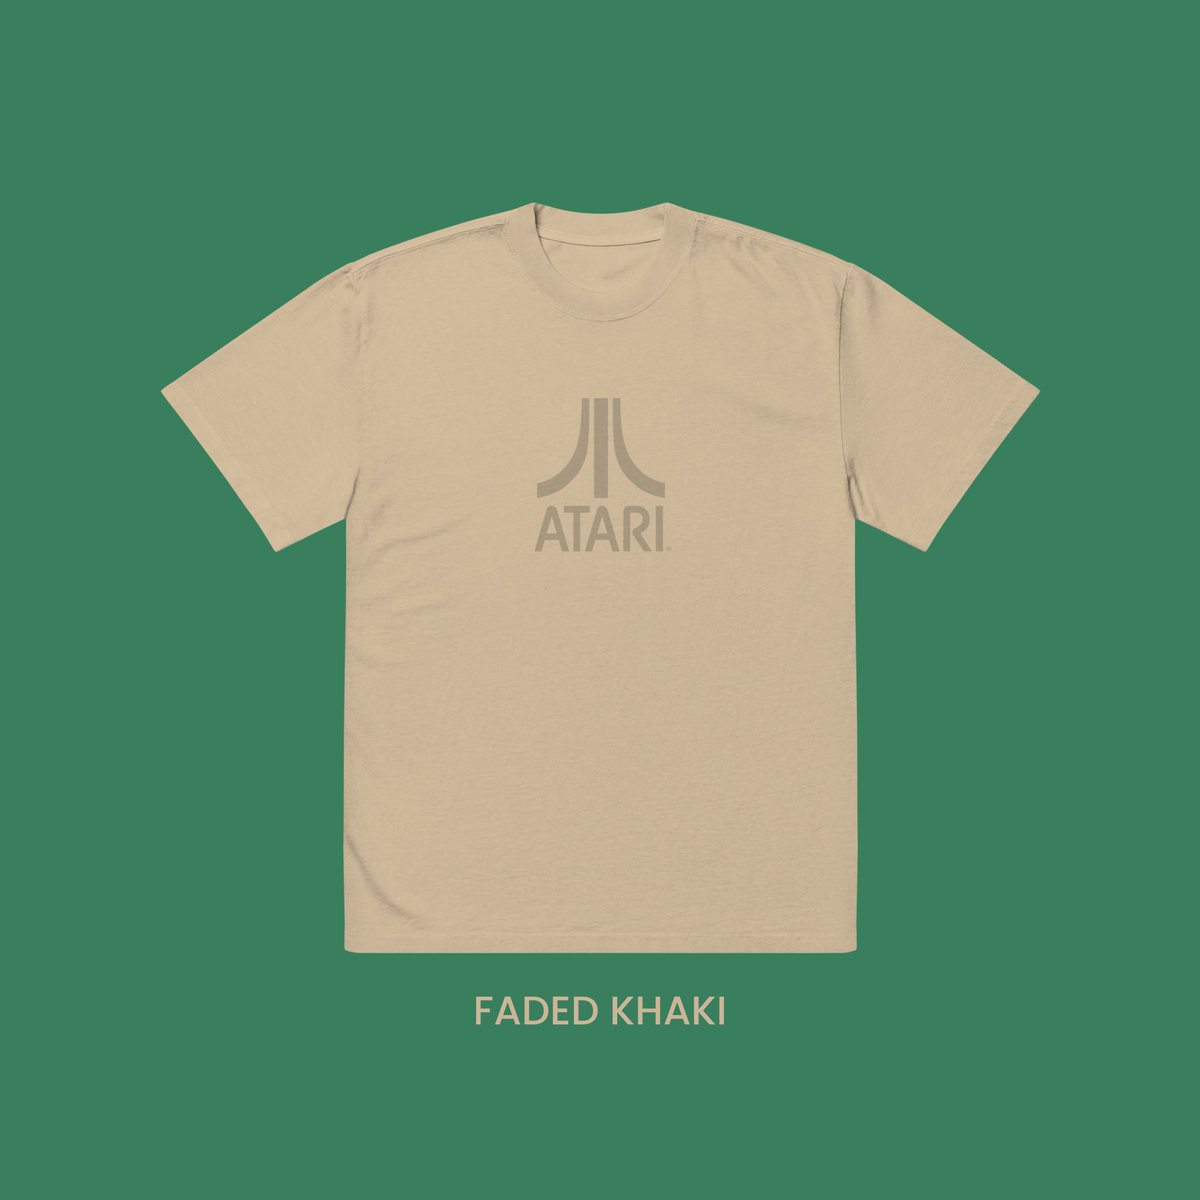 This oversized tee in faded Khaki is part of our new Retro Roots collection. Boxy, oversized fit with dropped shoulders. Garment dyed and preshrunk. link.atari.com/retro-roots